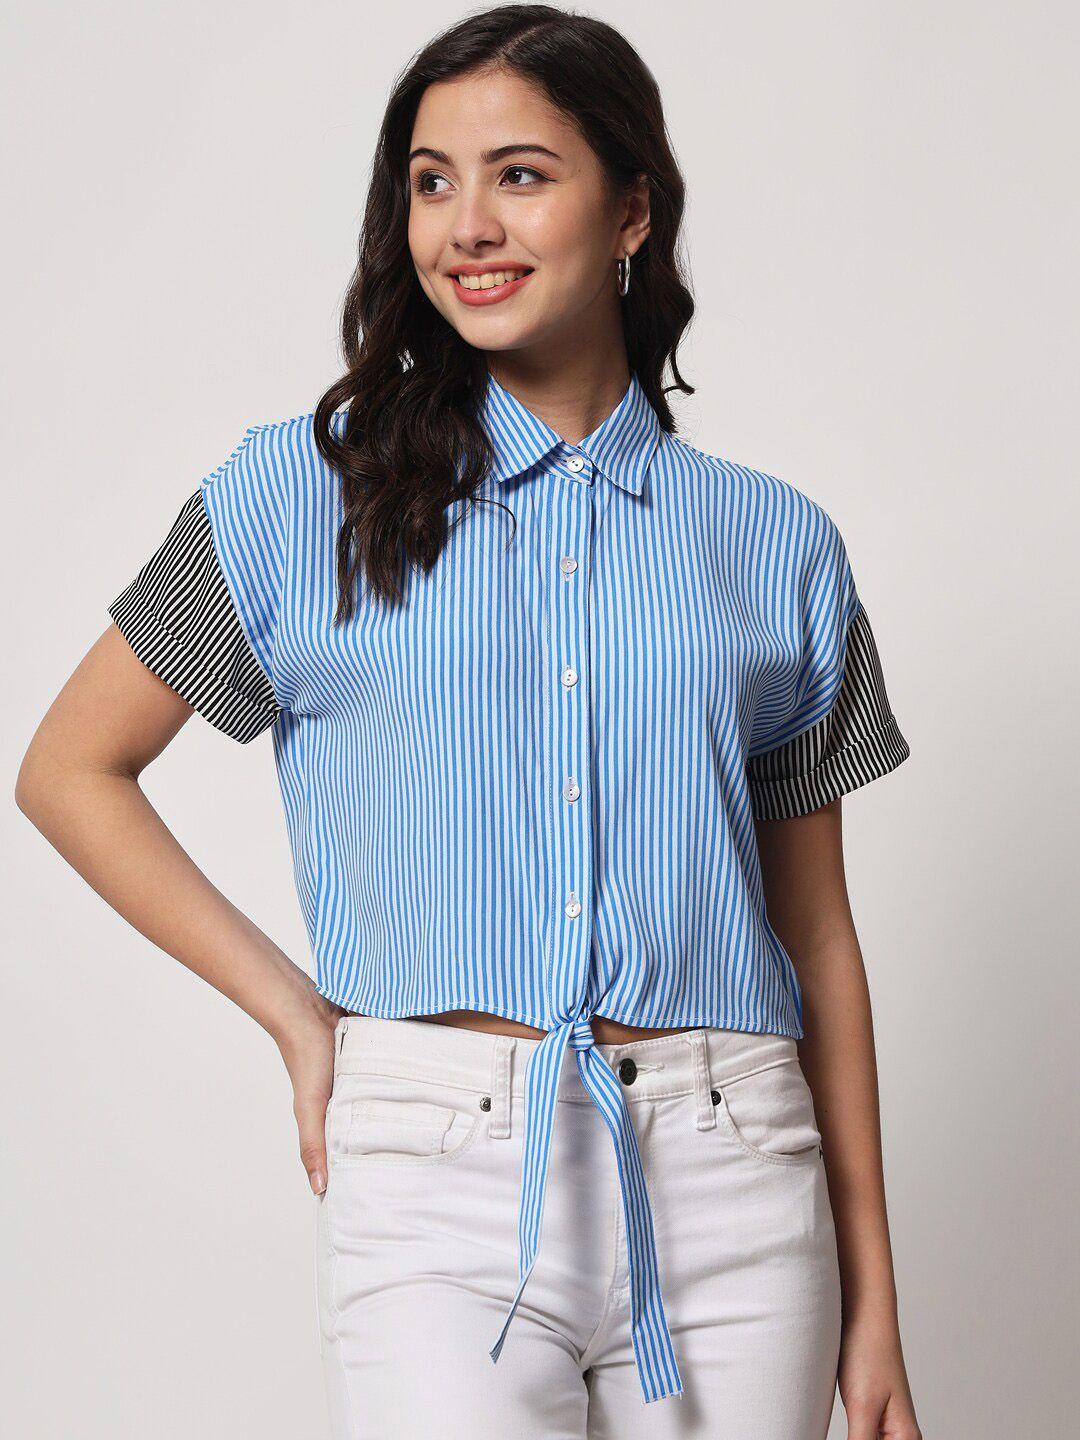 charmgal-blue-striped-shirt-style-crop-top